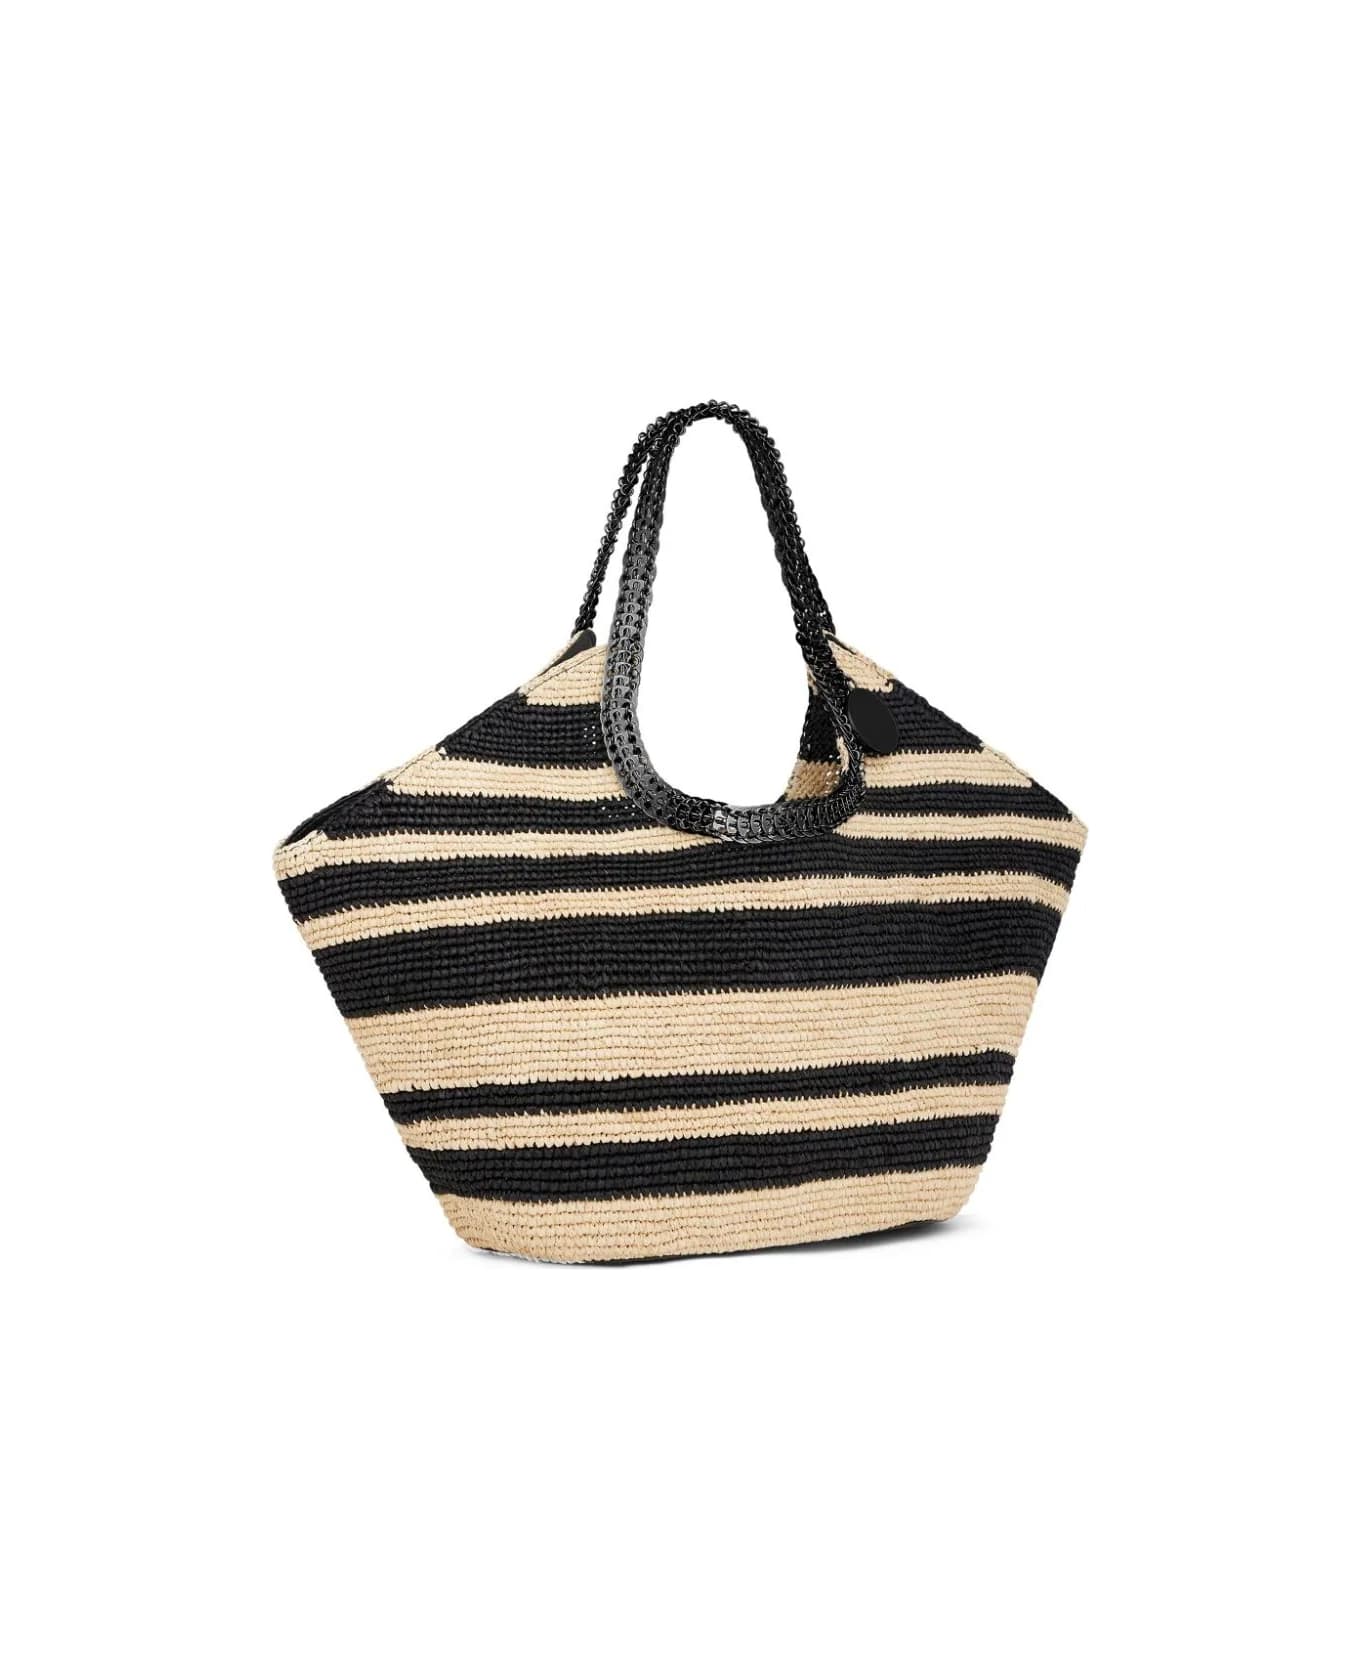 Paco Rabanne Striped Raffia Tote Bag With 1969 Discs Details - Natural Black